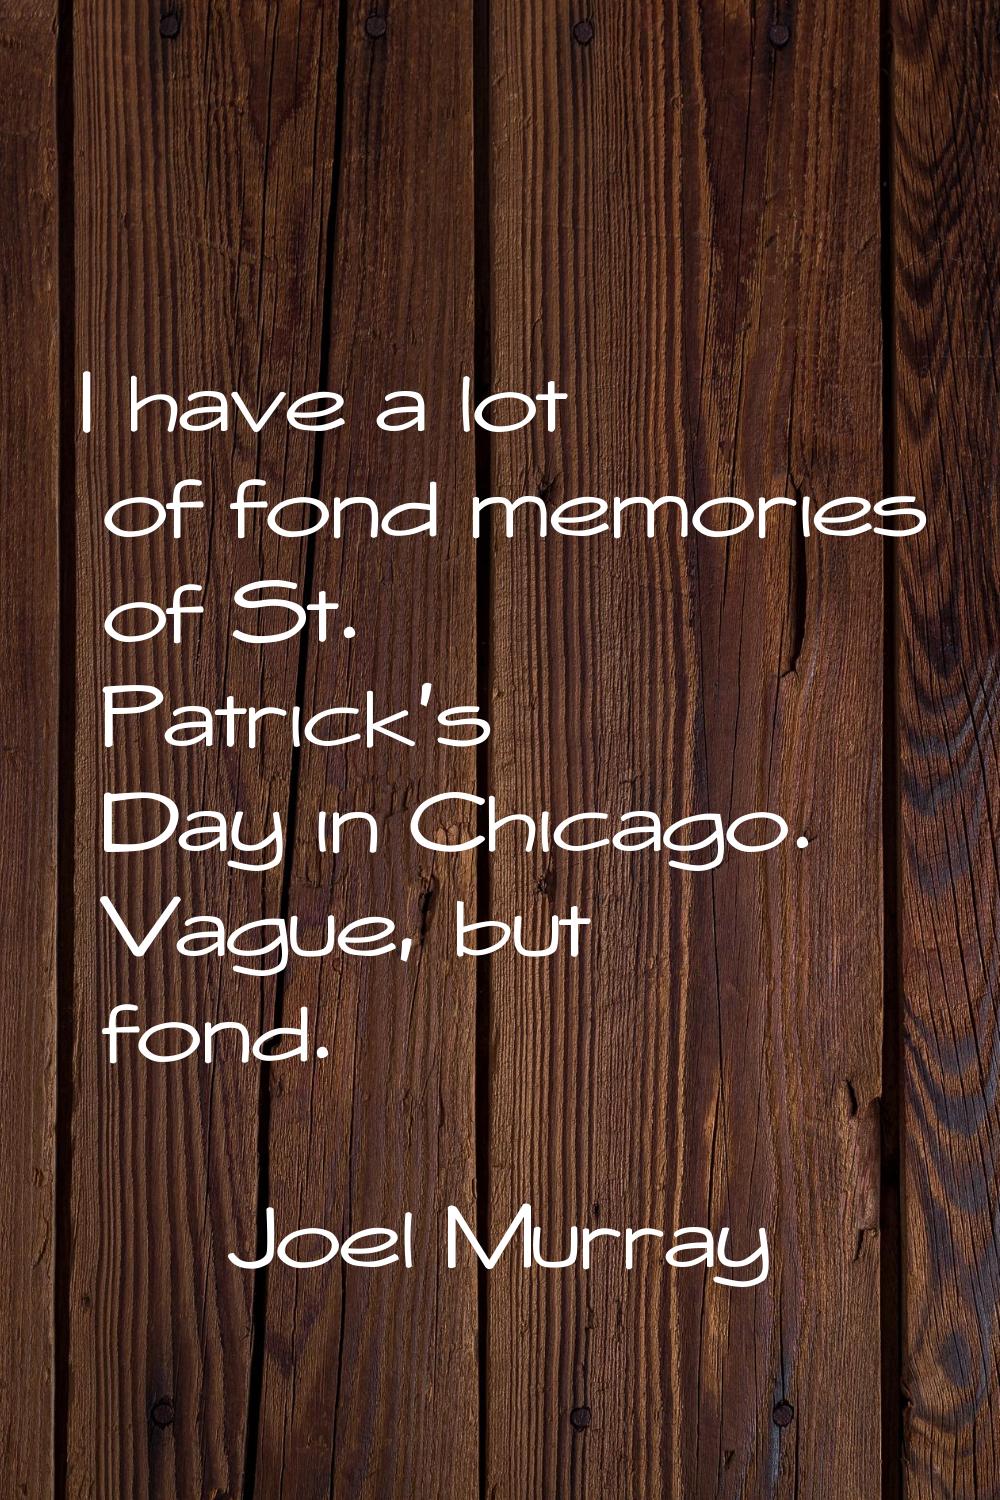 I have a lot of fond memories of St. Patrick's Day in Chicago. Vague, but fond.